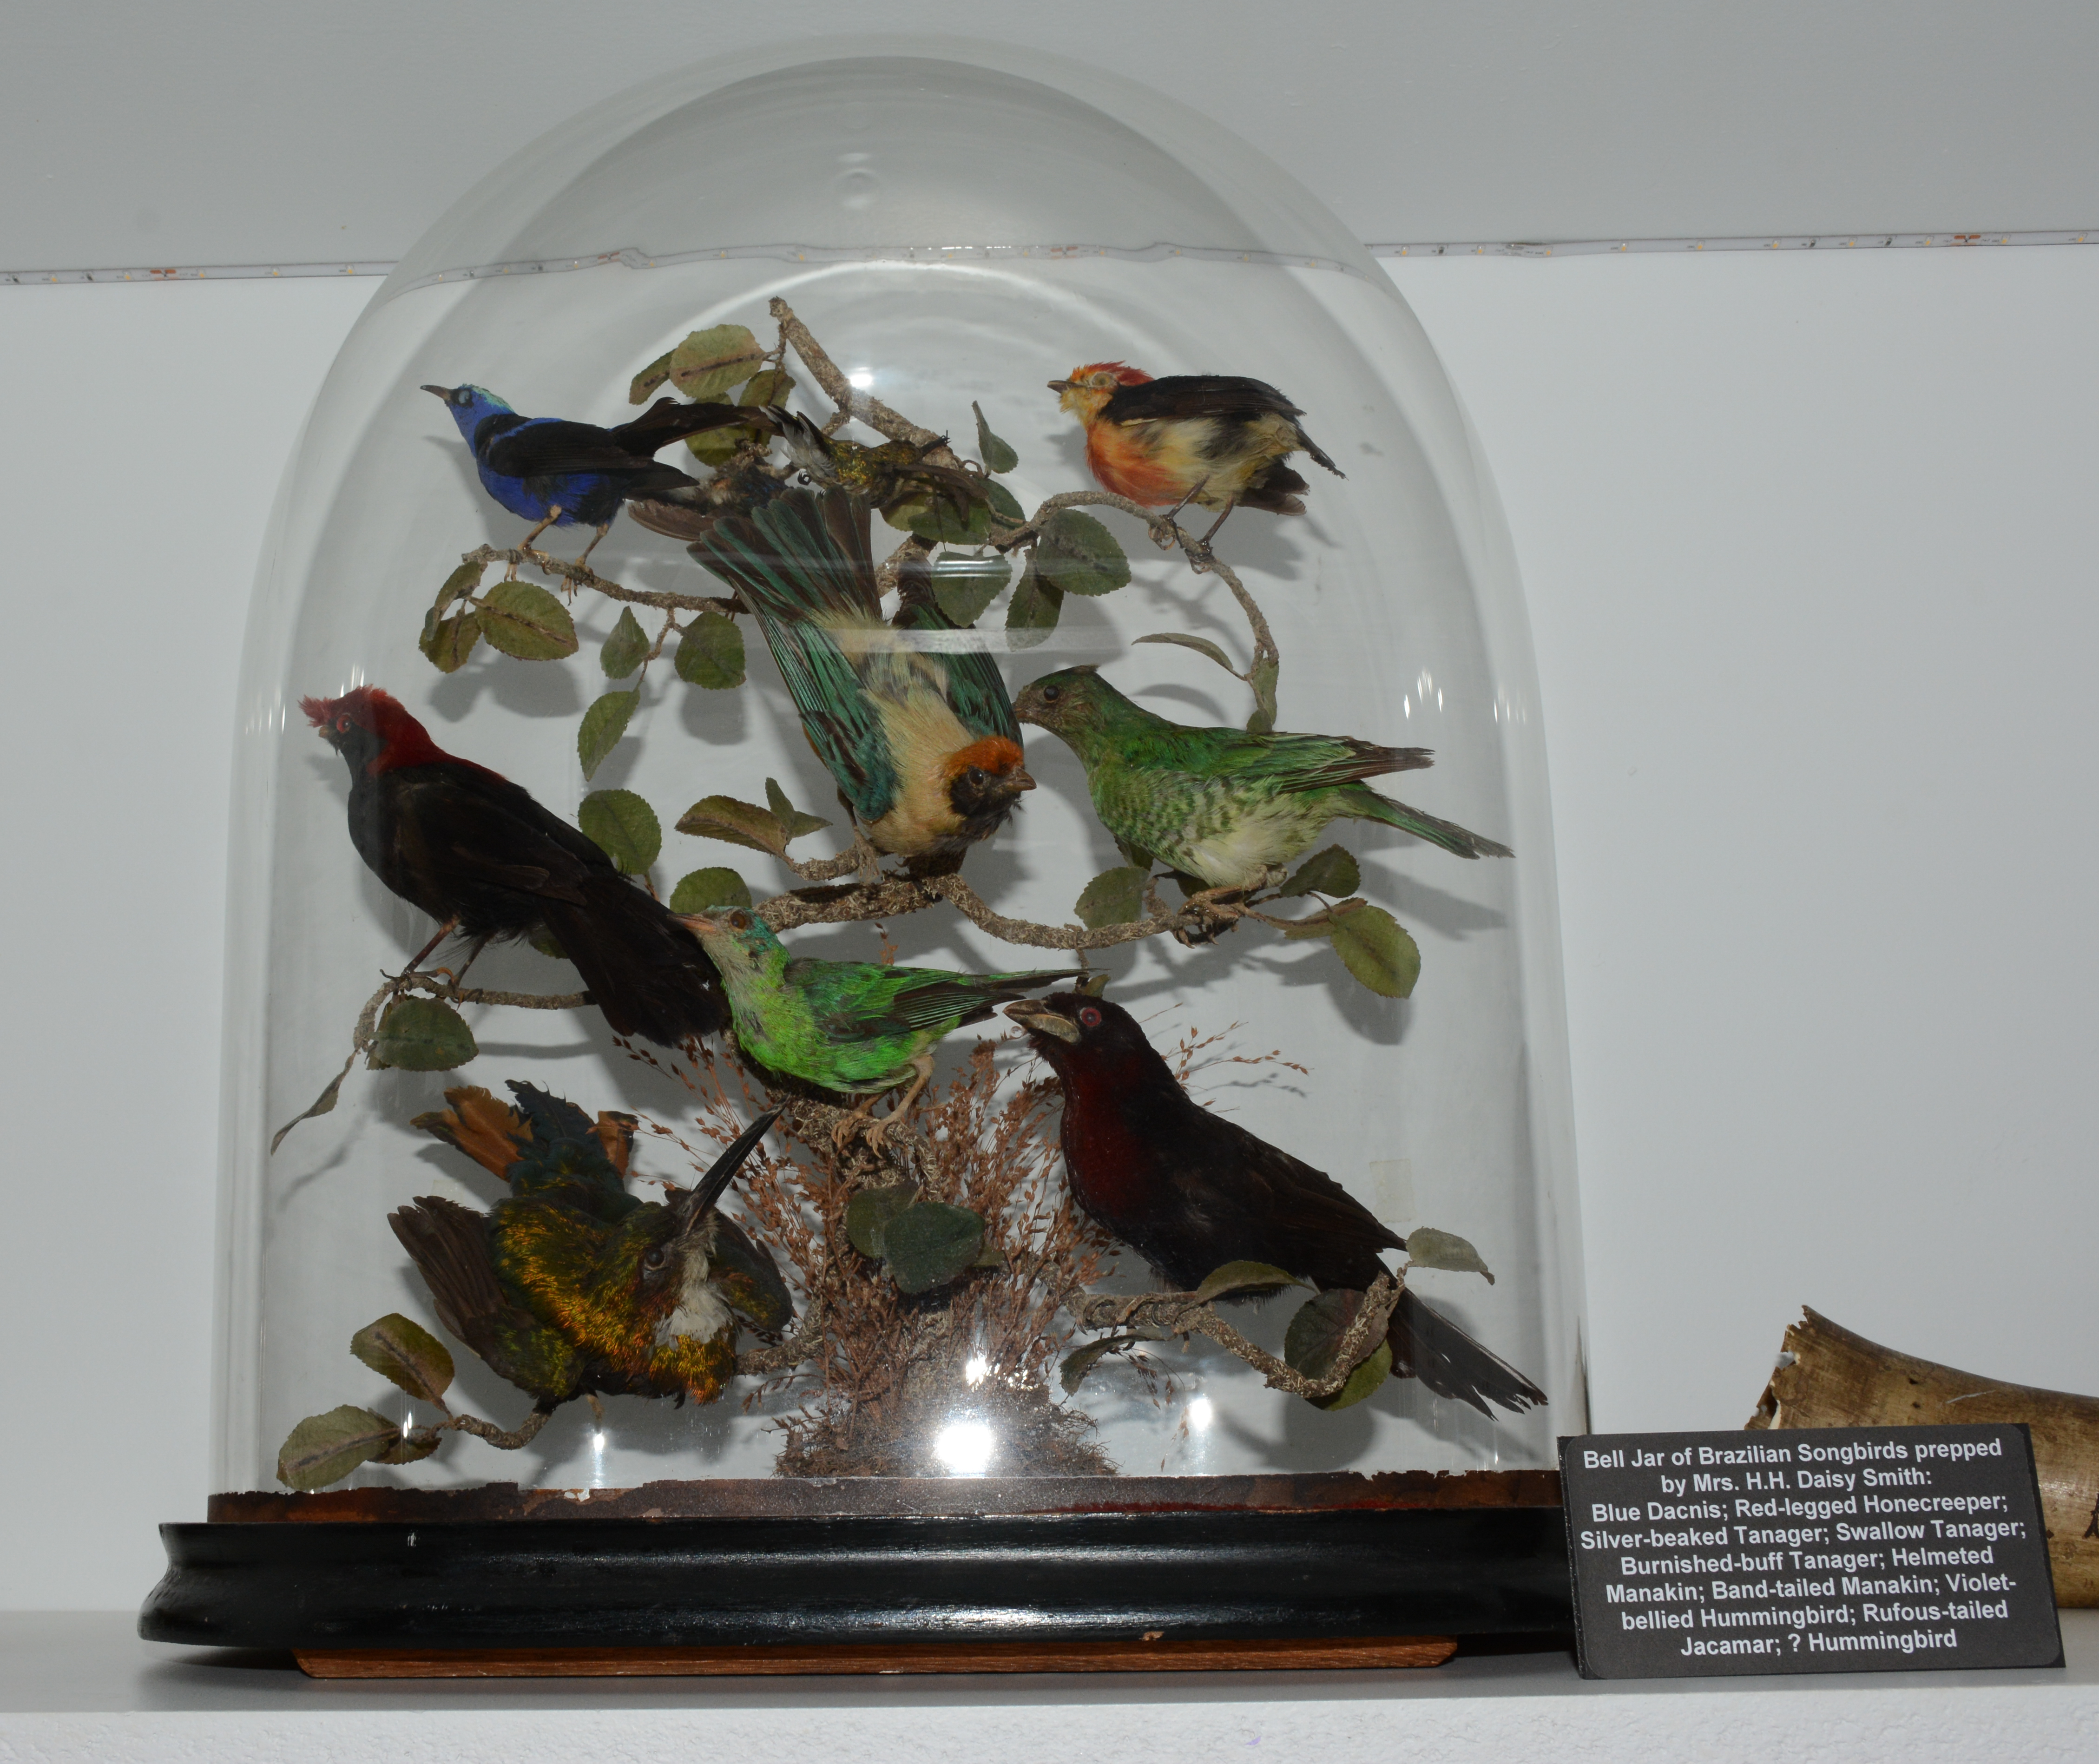 Bell Jar of Brazilian Songbirds prepped by Mrs. H.H. Daisy Smith: Blues Dacnis; Red-legged Honecreeper; Silver-beaker Tanager; Swallow Tanager; Burnished-buff Tanager; Helmeted Manakin; Band-tailed Manakin; Violet-bellied Hummingbird; Rufous-tailed Jacamar; Hummingbird